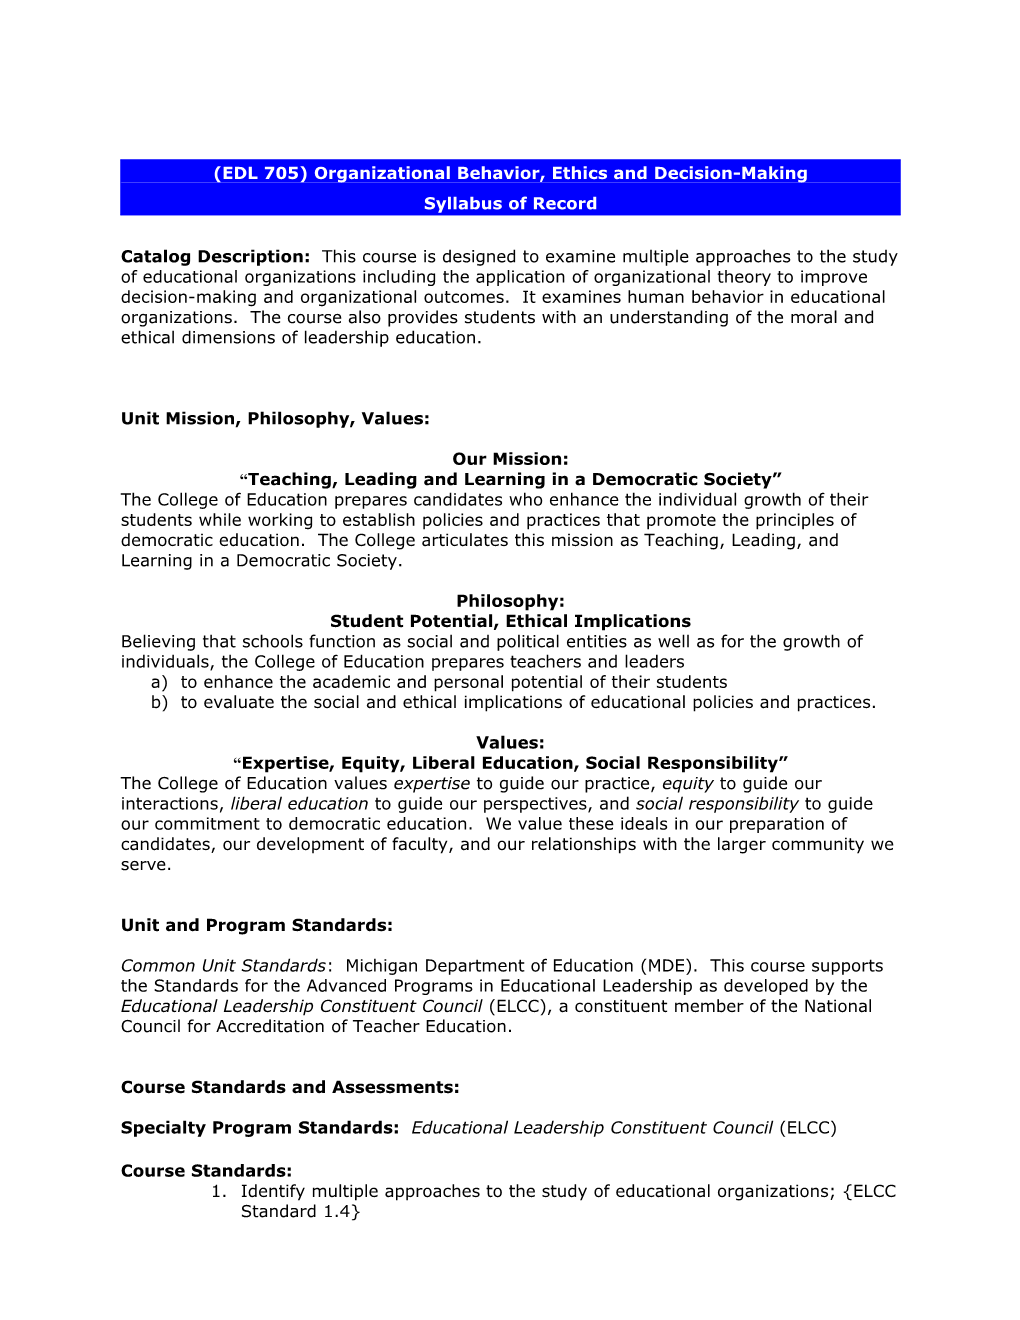 EDL 742 Syllabus of Record: School Board Relations s1